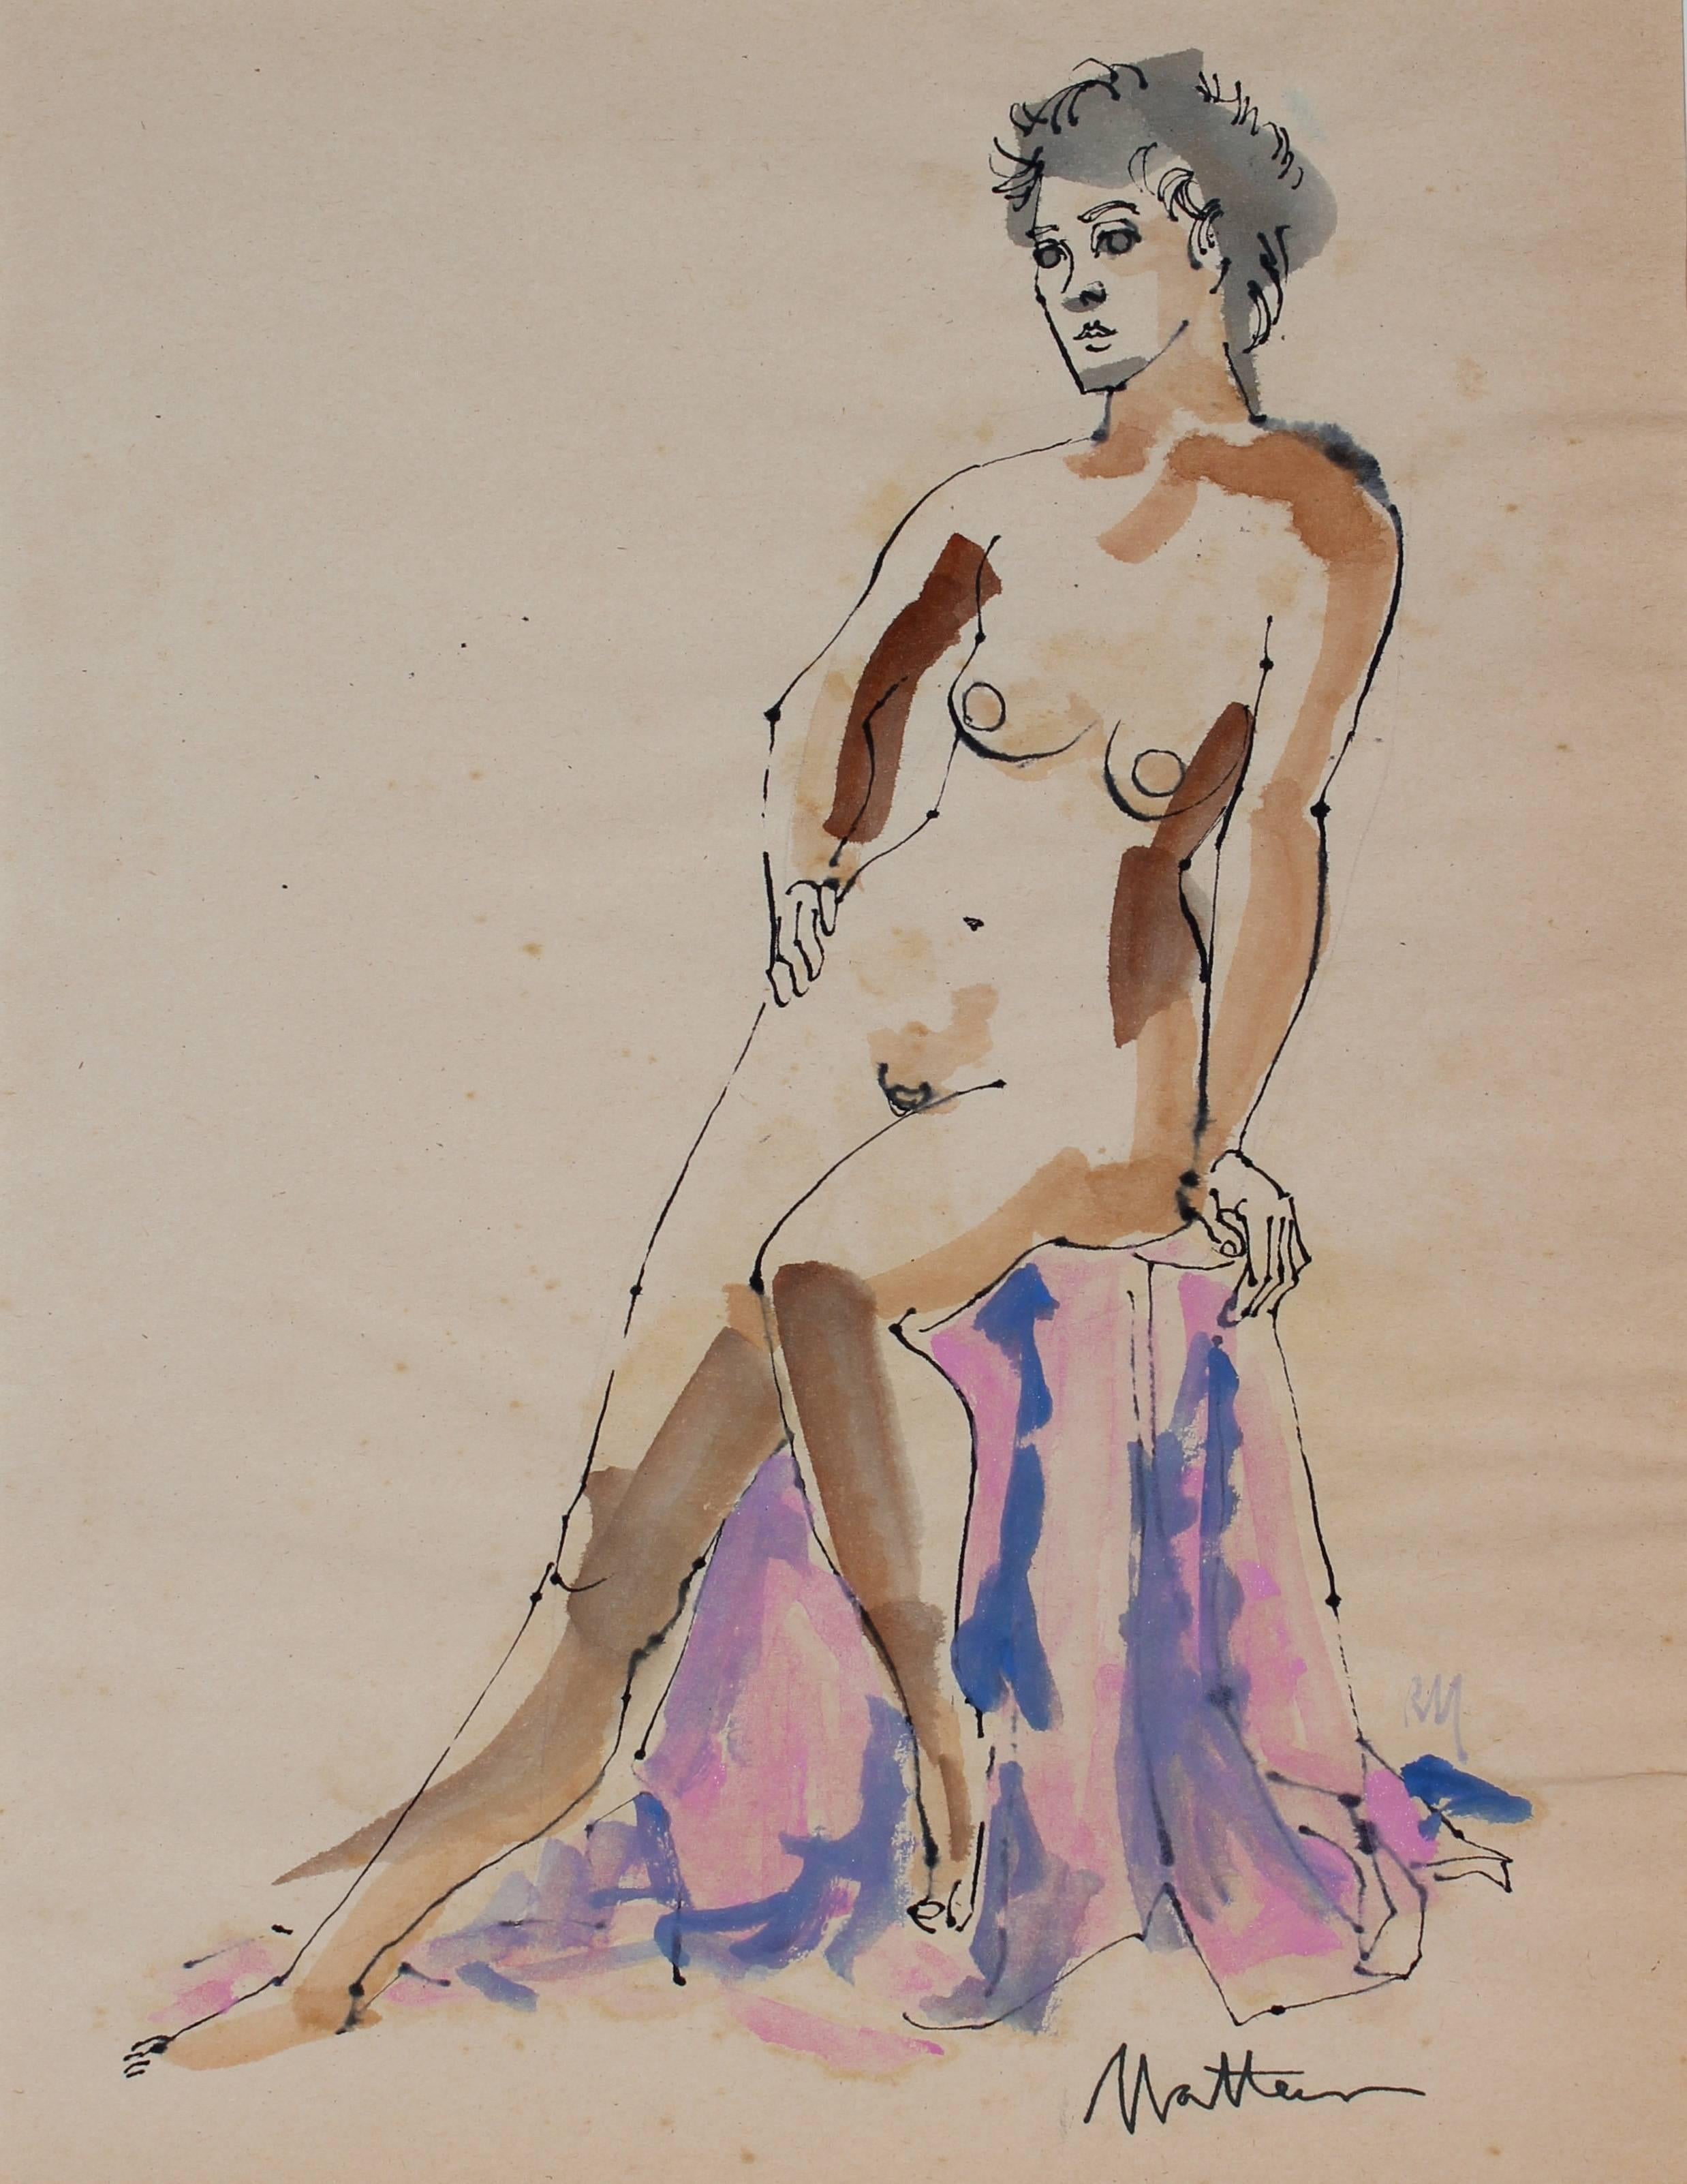 Rip Matteson Nude - Seated Figure in Watercolor and Ink, 1965